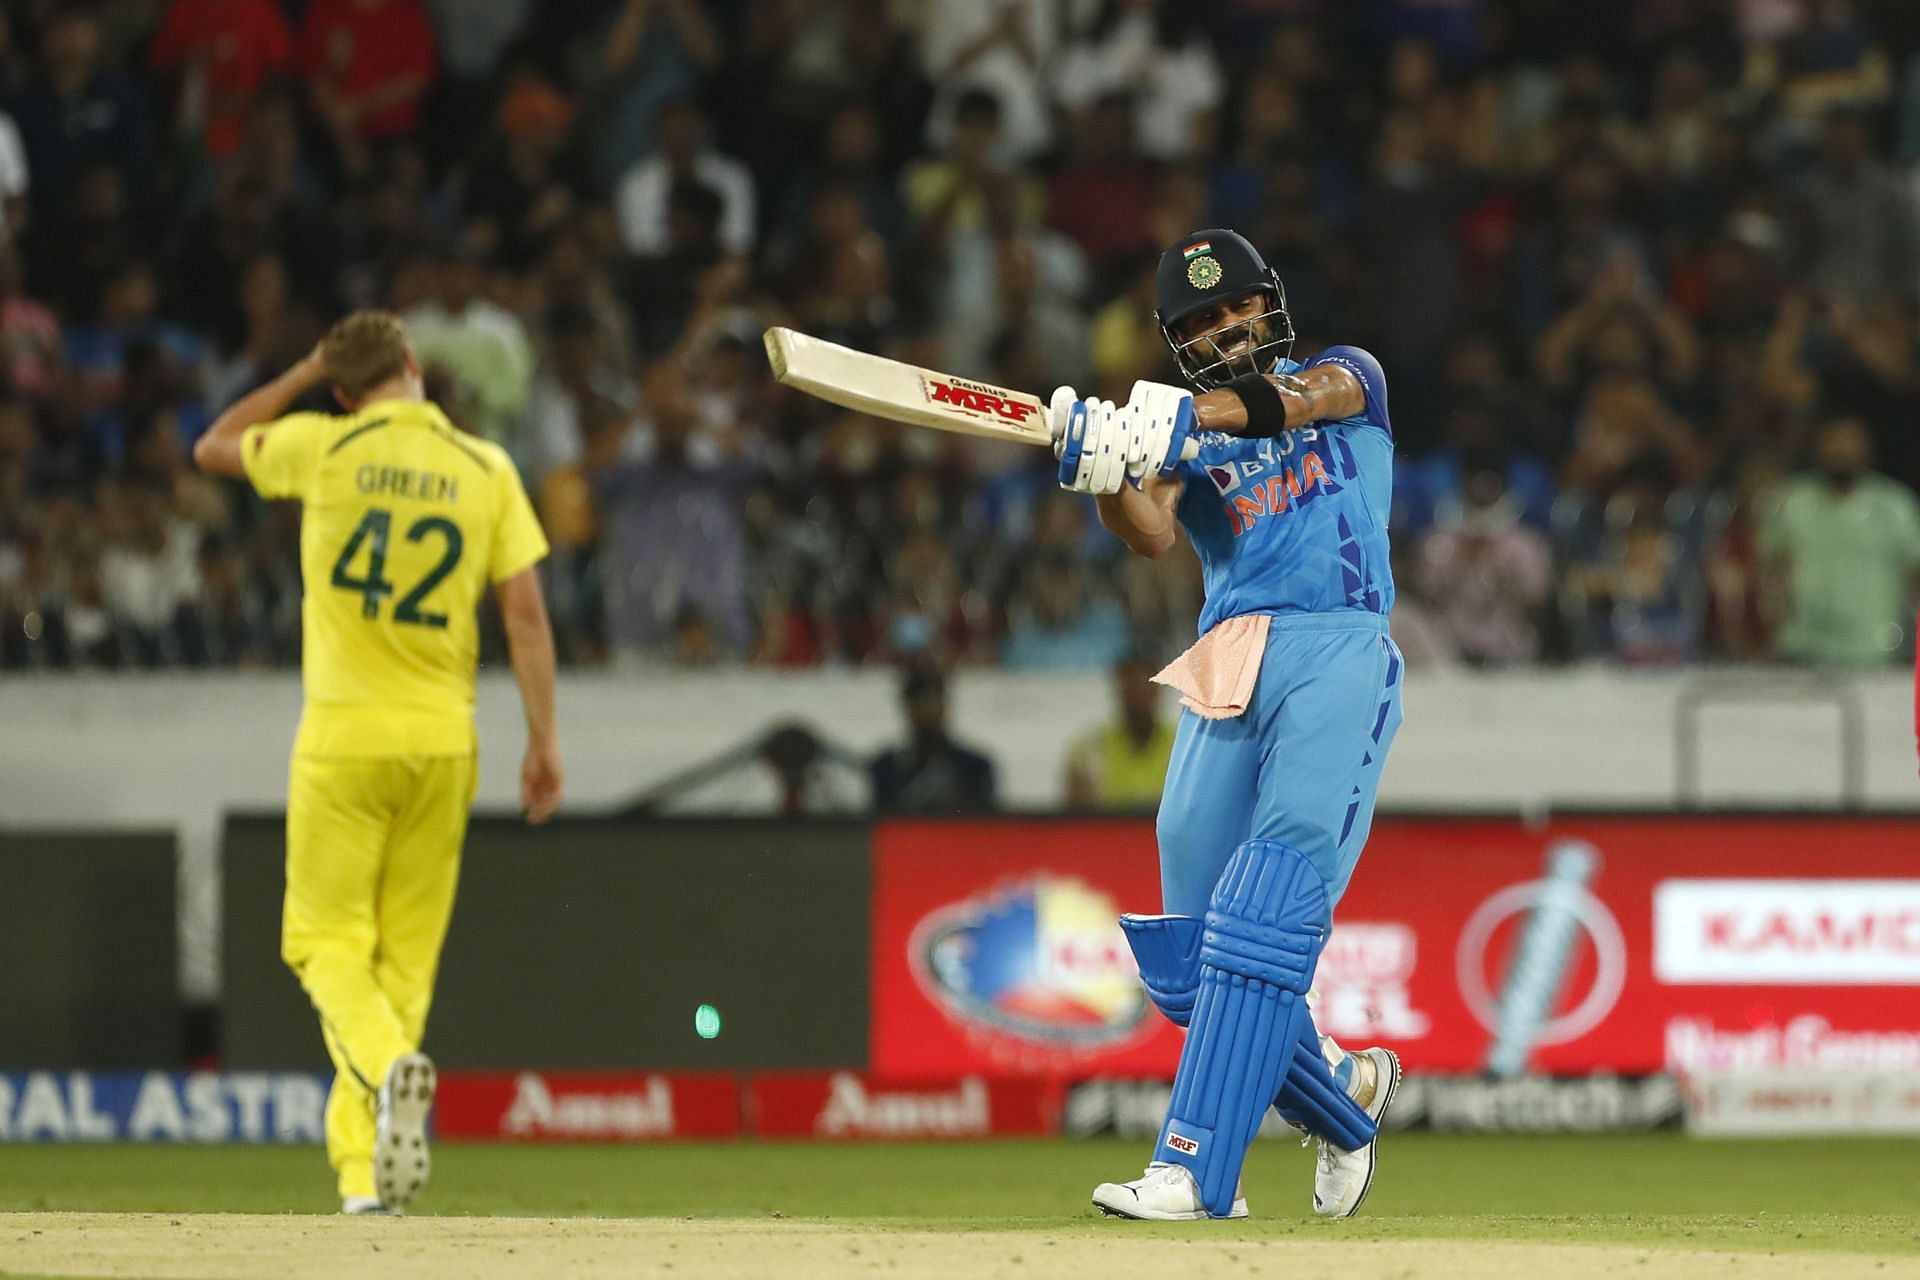 Senior Team India batter Virat Kohli has rediscovered his form and confidence. Pic: Getty Images